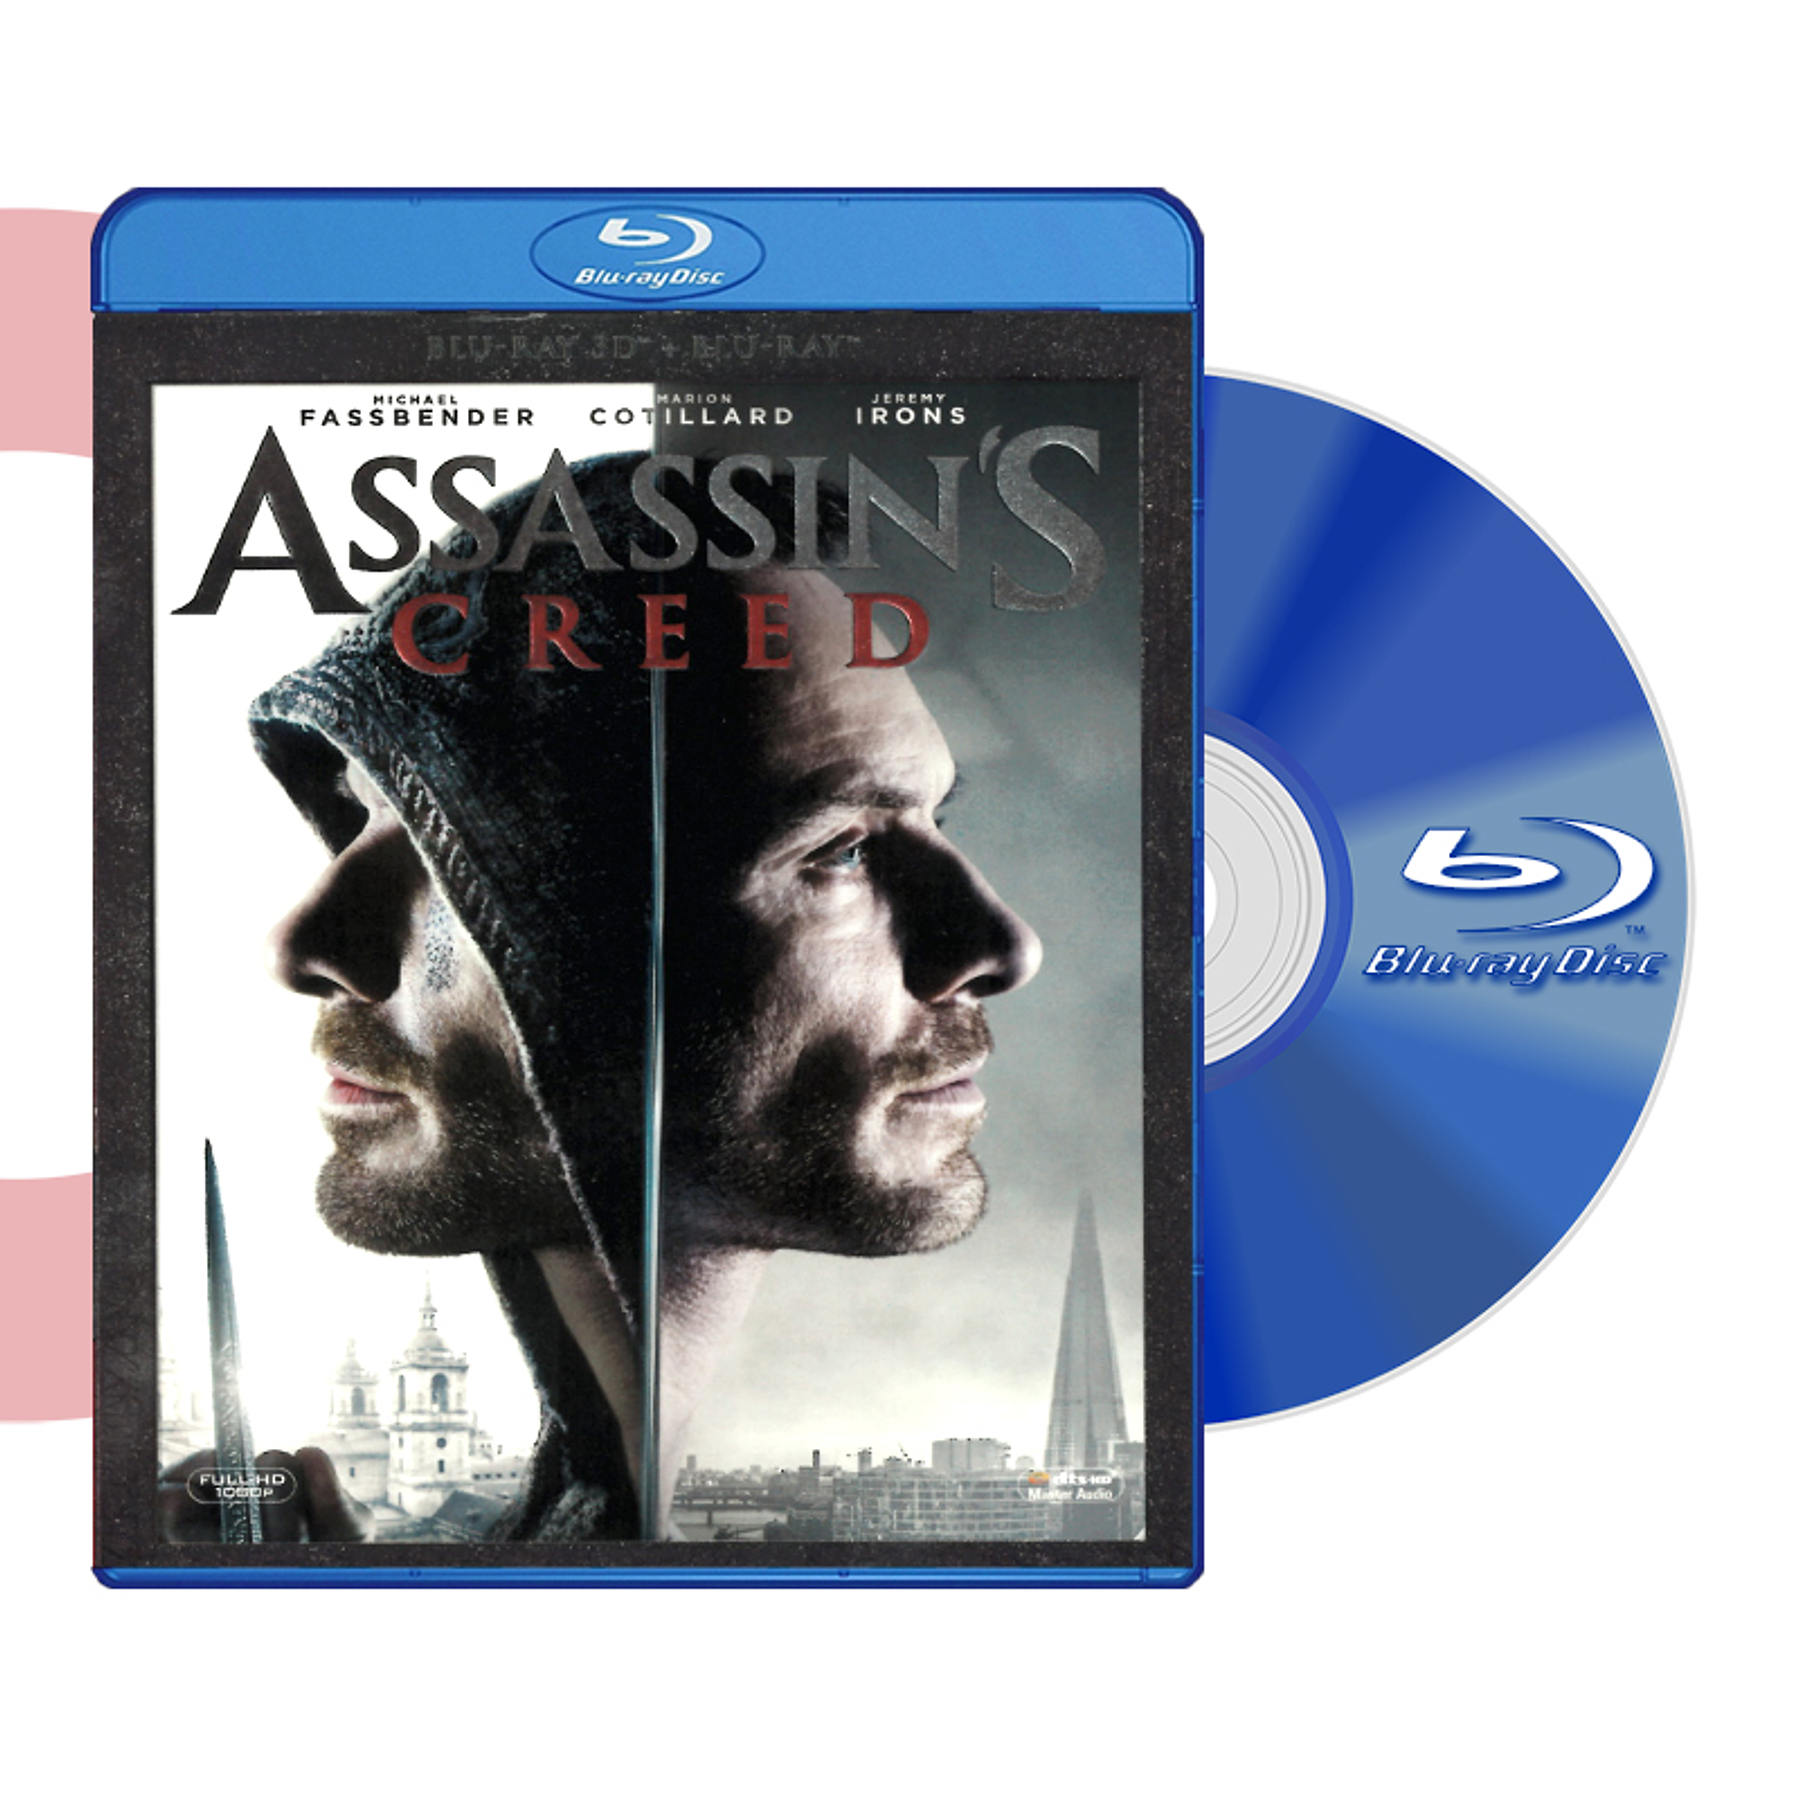 BLU RAY 3D ASSASSIN'S CREED